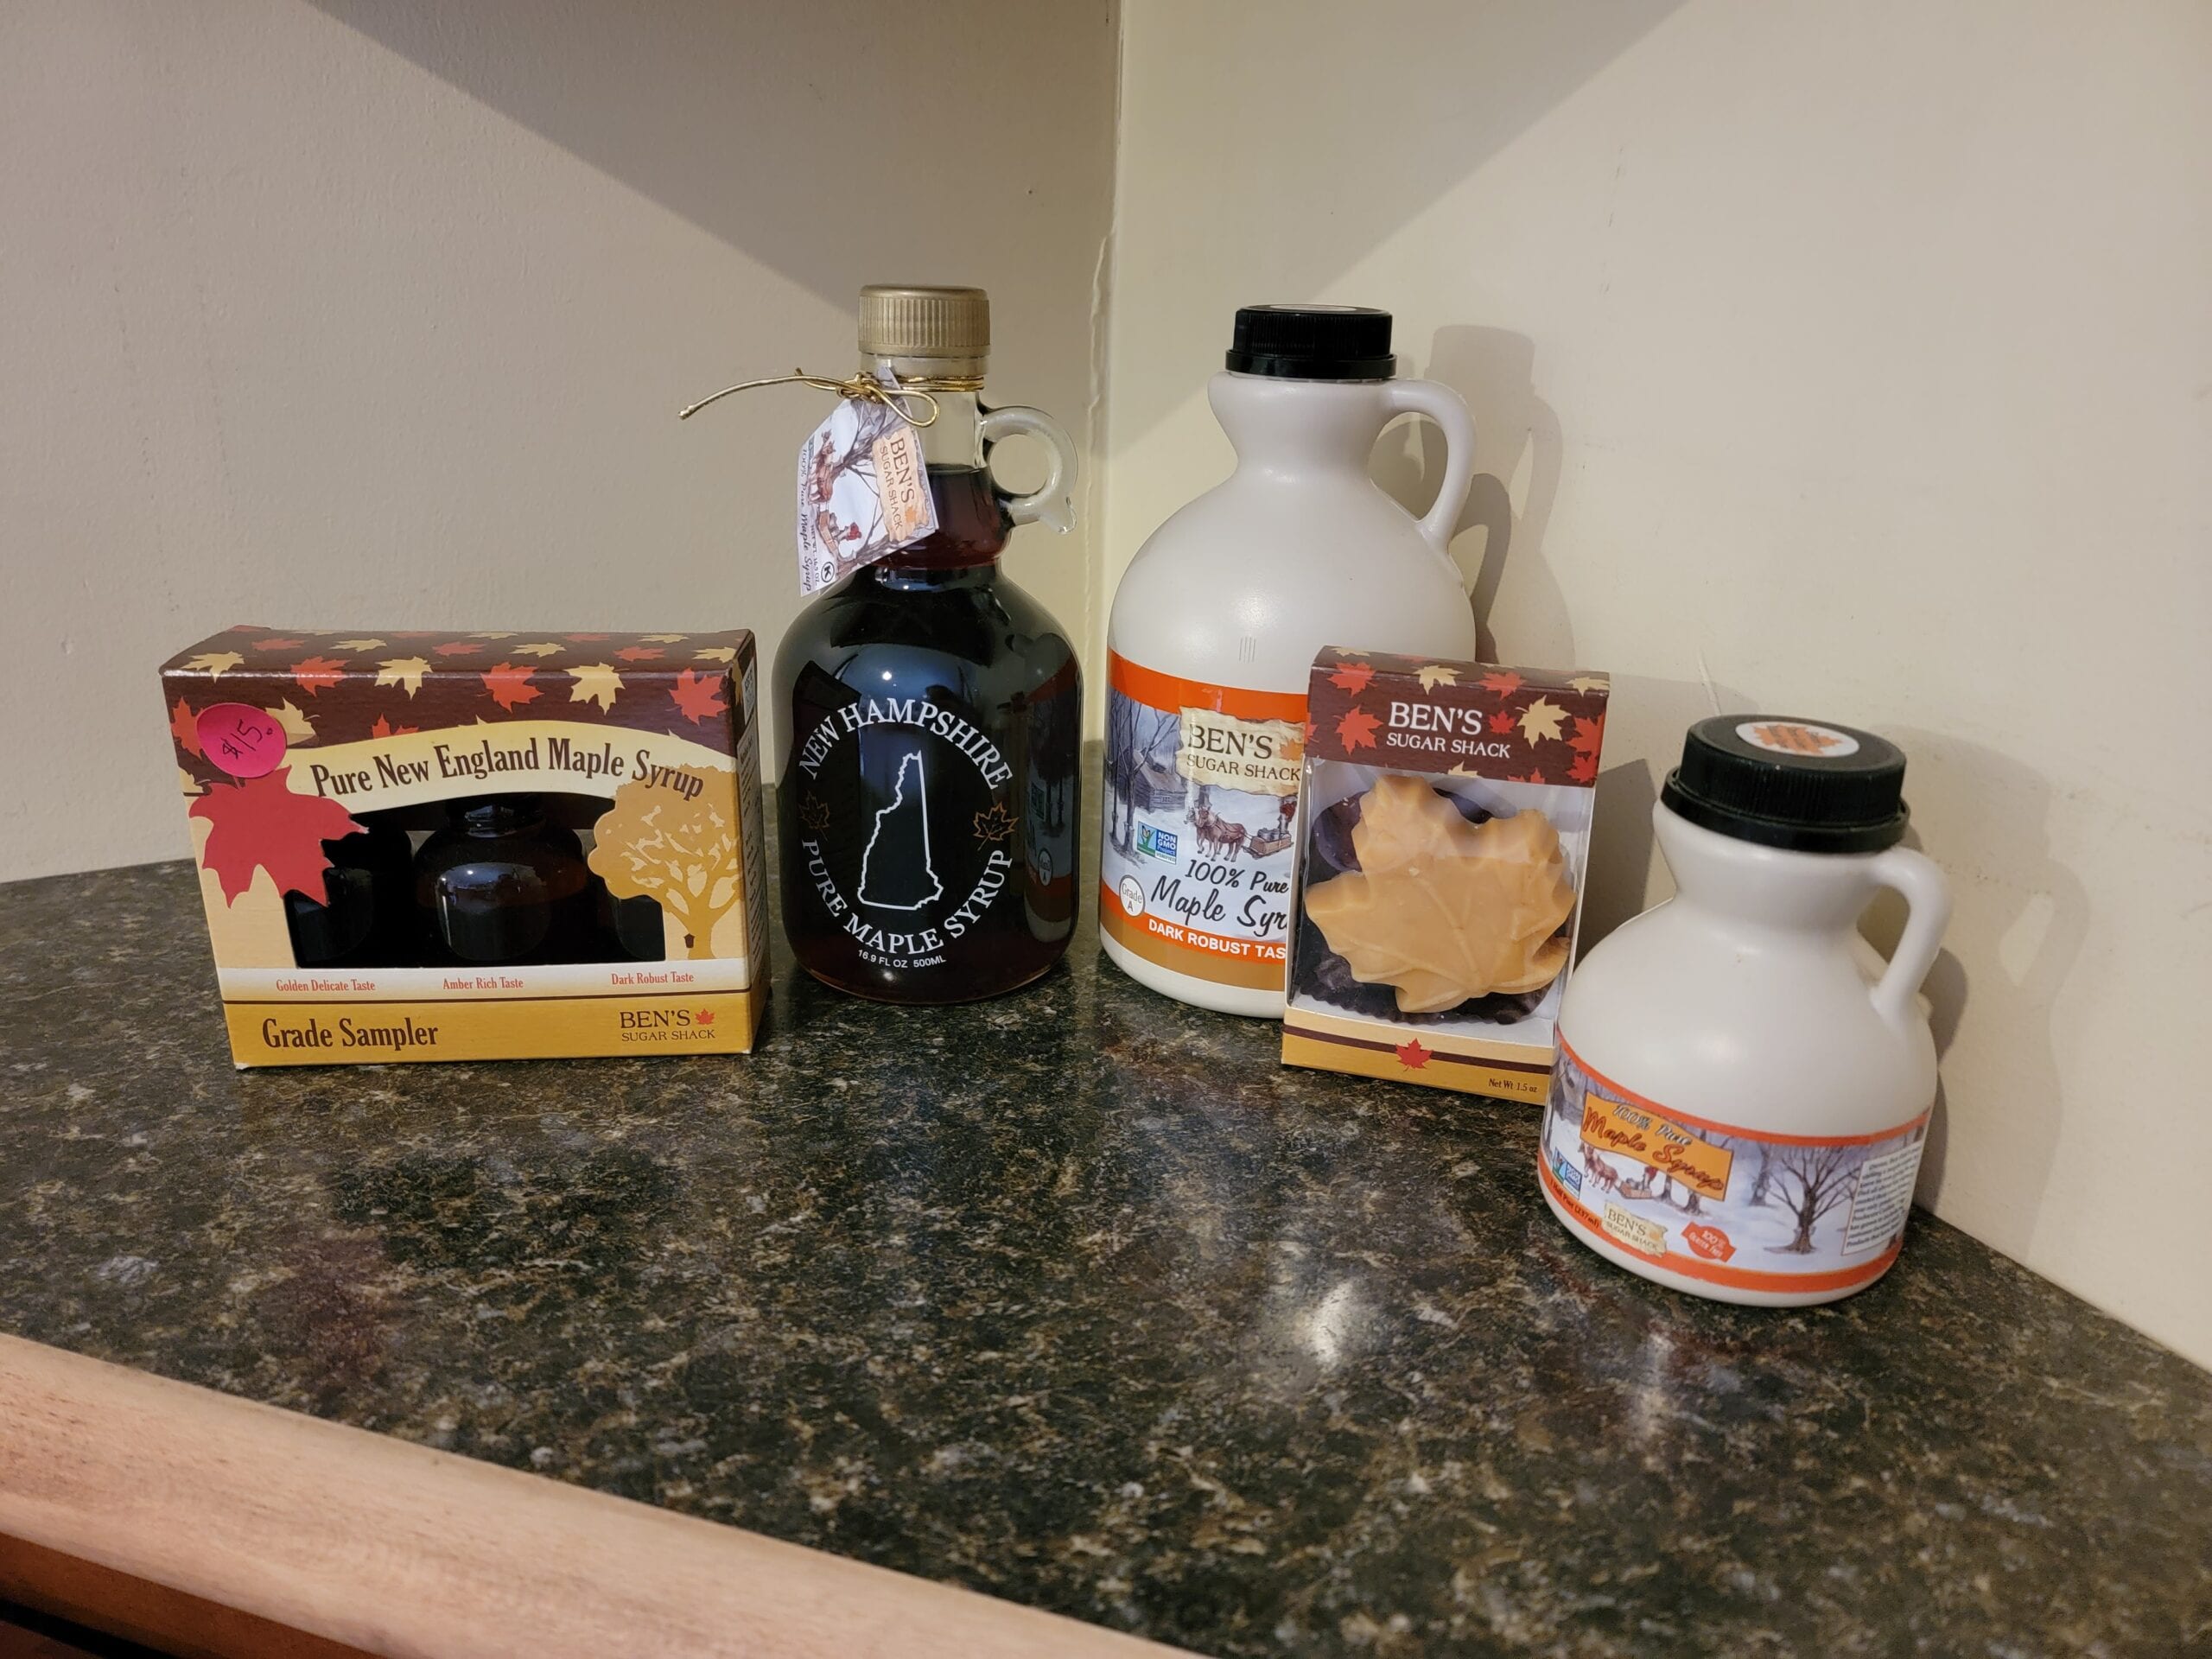 Various types of maple products are displayed on a marble countertop, including syrup, samplers, and maple candy.